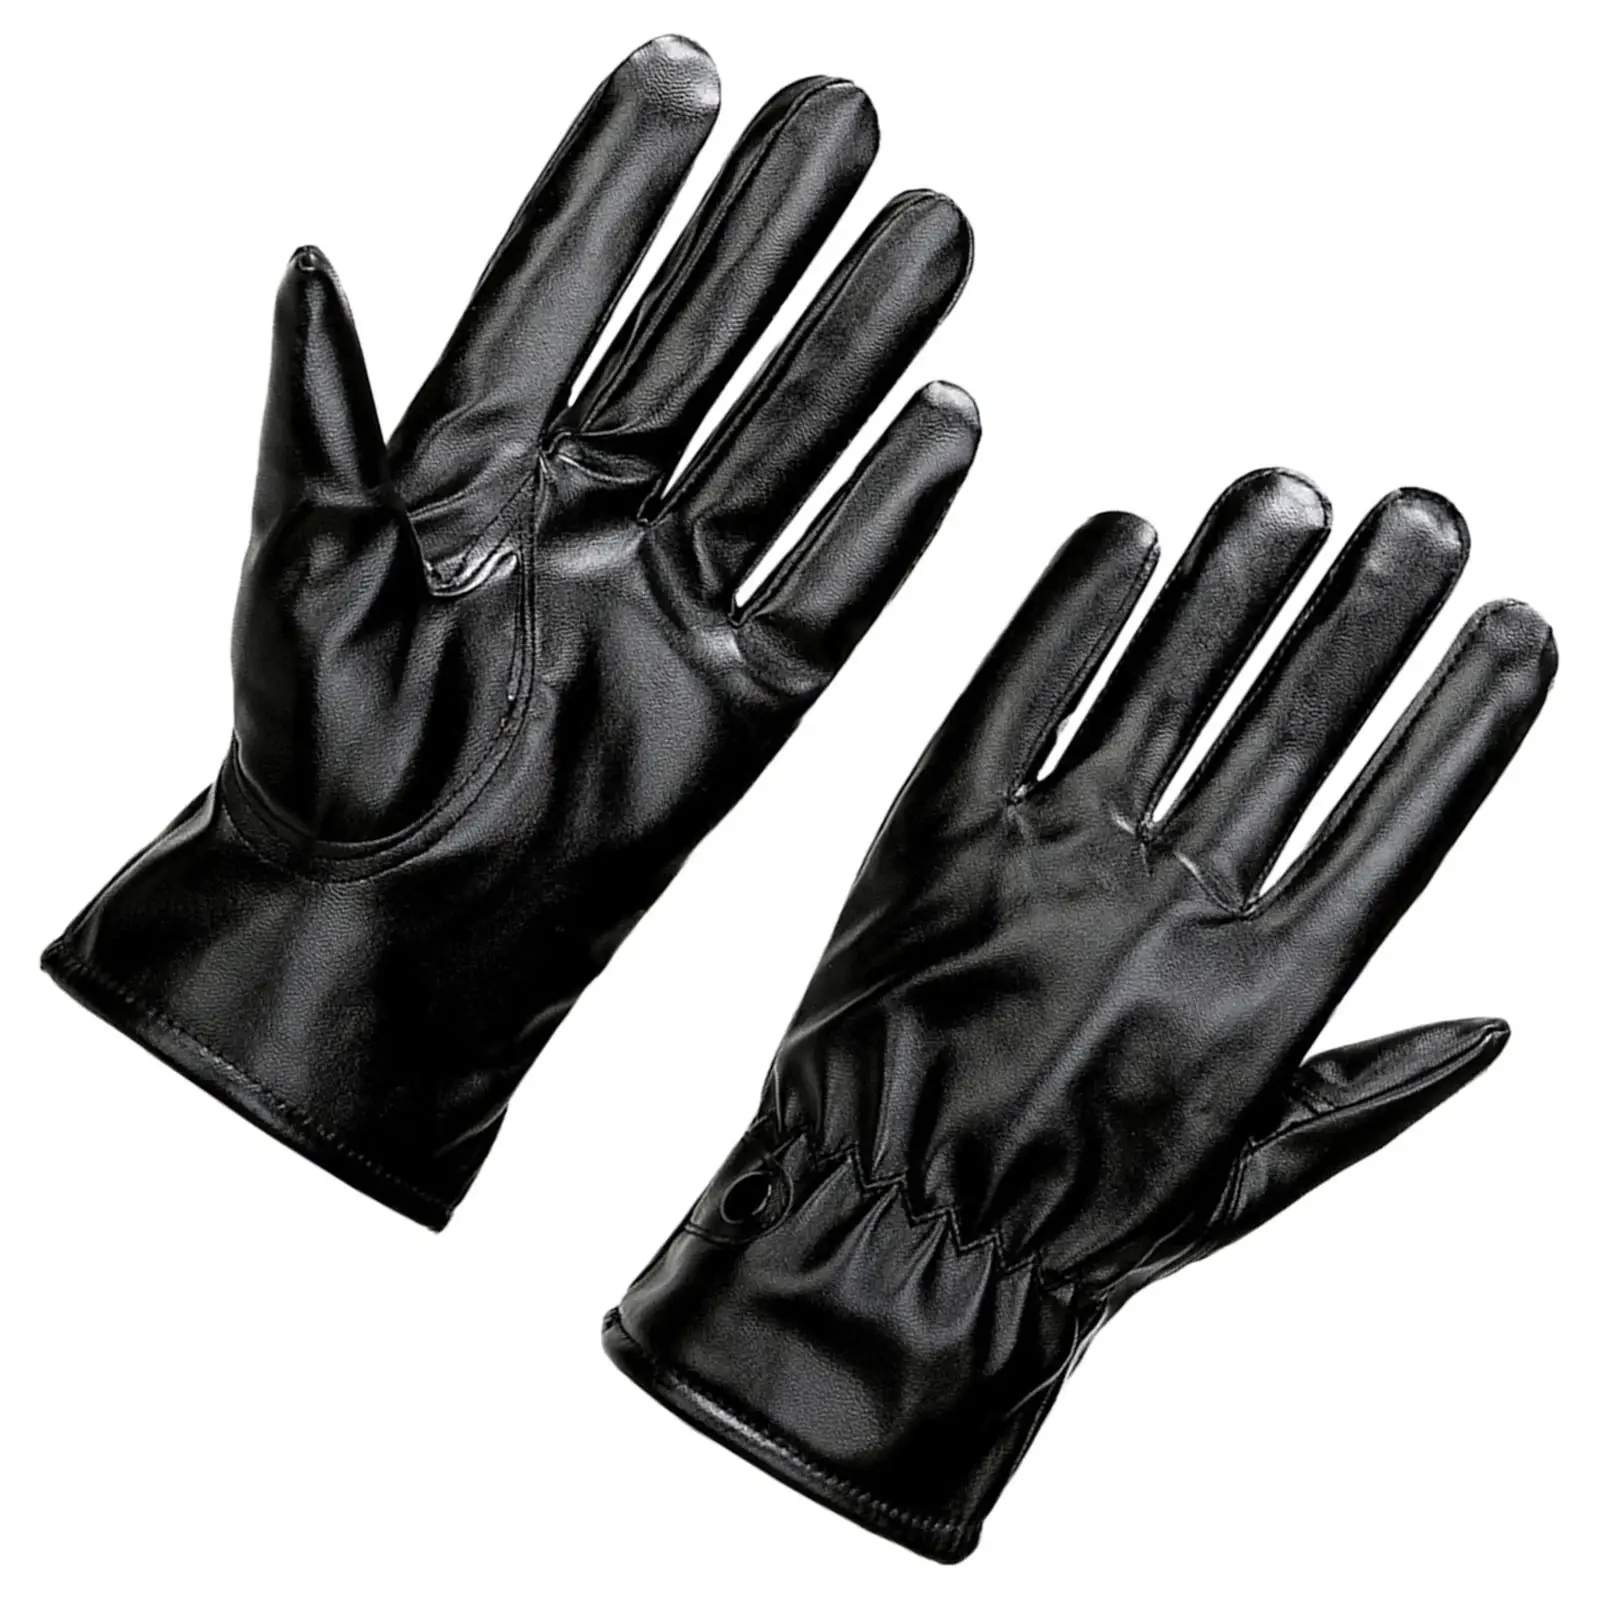 Winter Gloves Men PU Leather Driving Gloves Elegant Comfortable Multipurpose for Driving, Motorcycle, Cycling